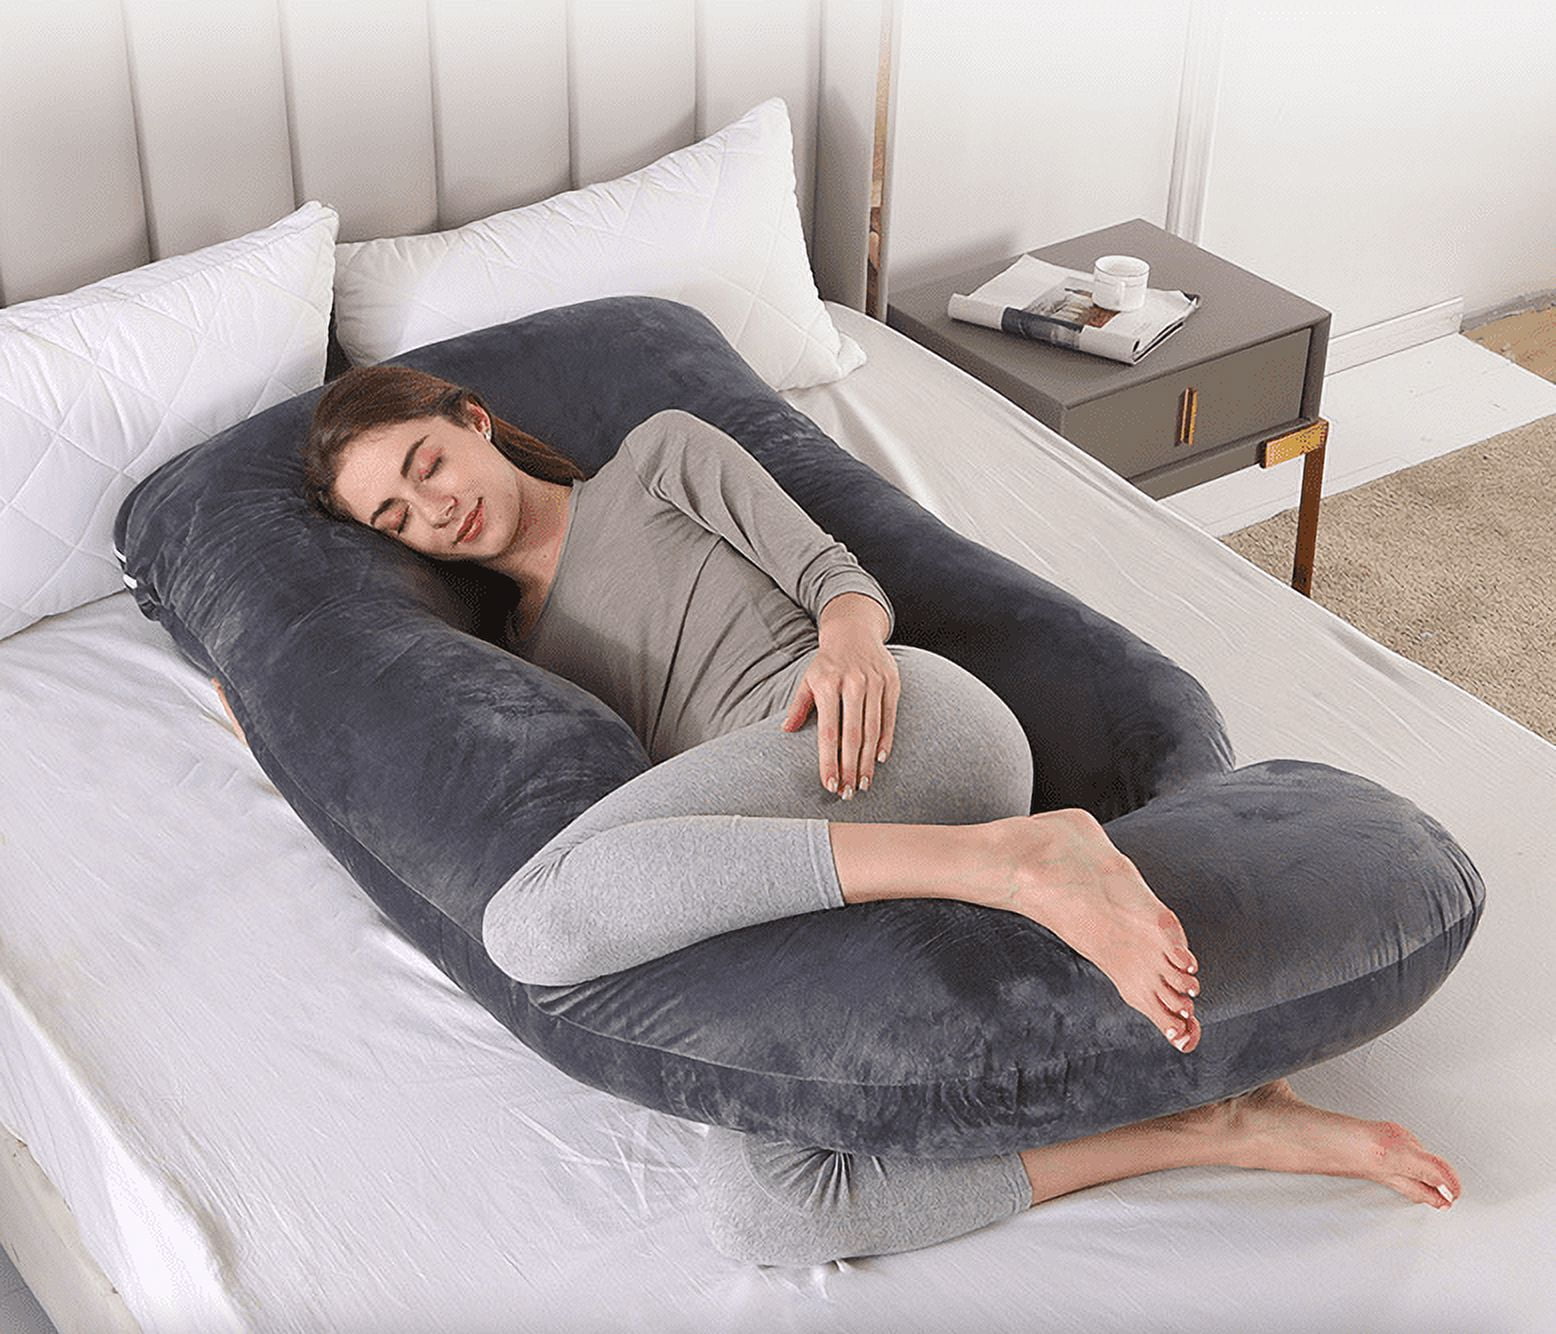 U Shape Sleeping Support Pillow For Pregnant Women Flannel Pillowcase  Maternity Body Pillows Pregnancy Side Sleepers Bedding